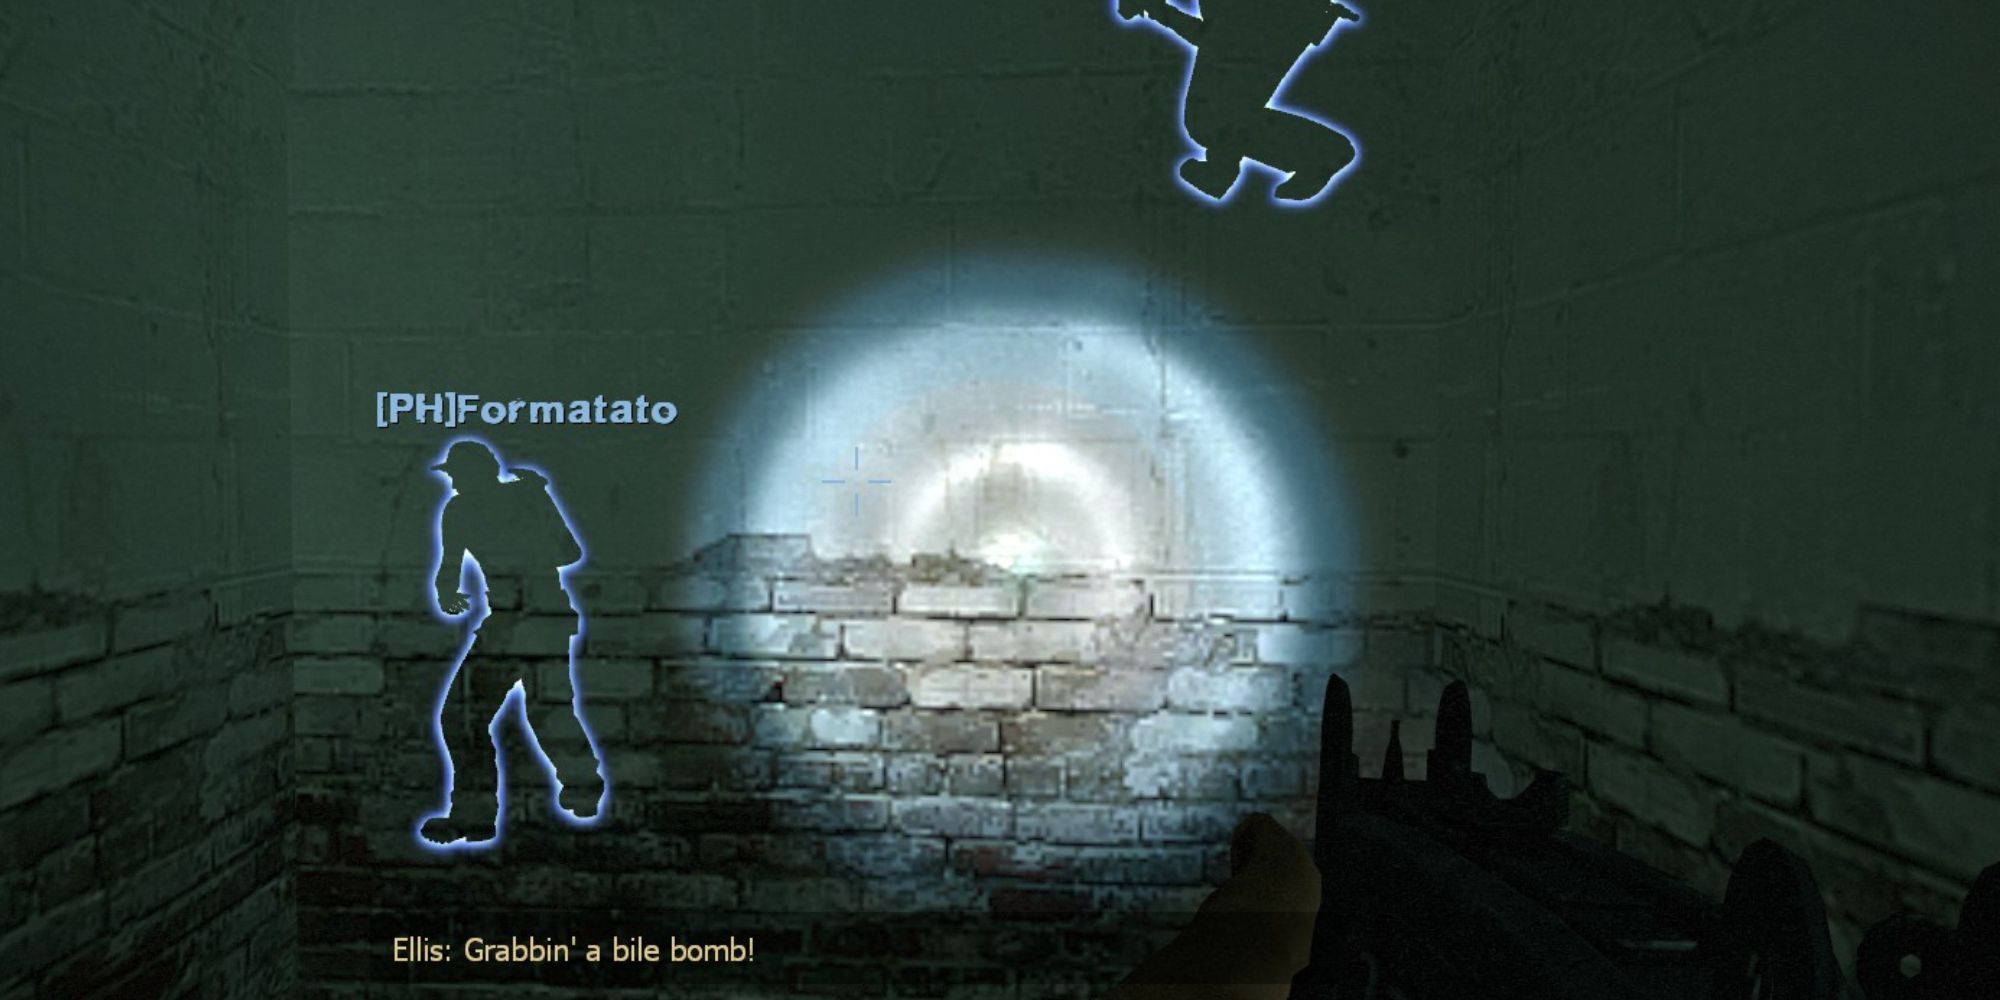 a bluish flashlight is pointed at a brick wall